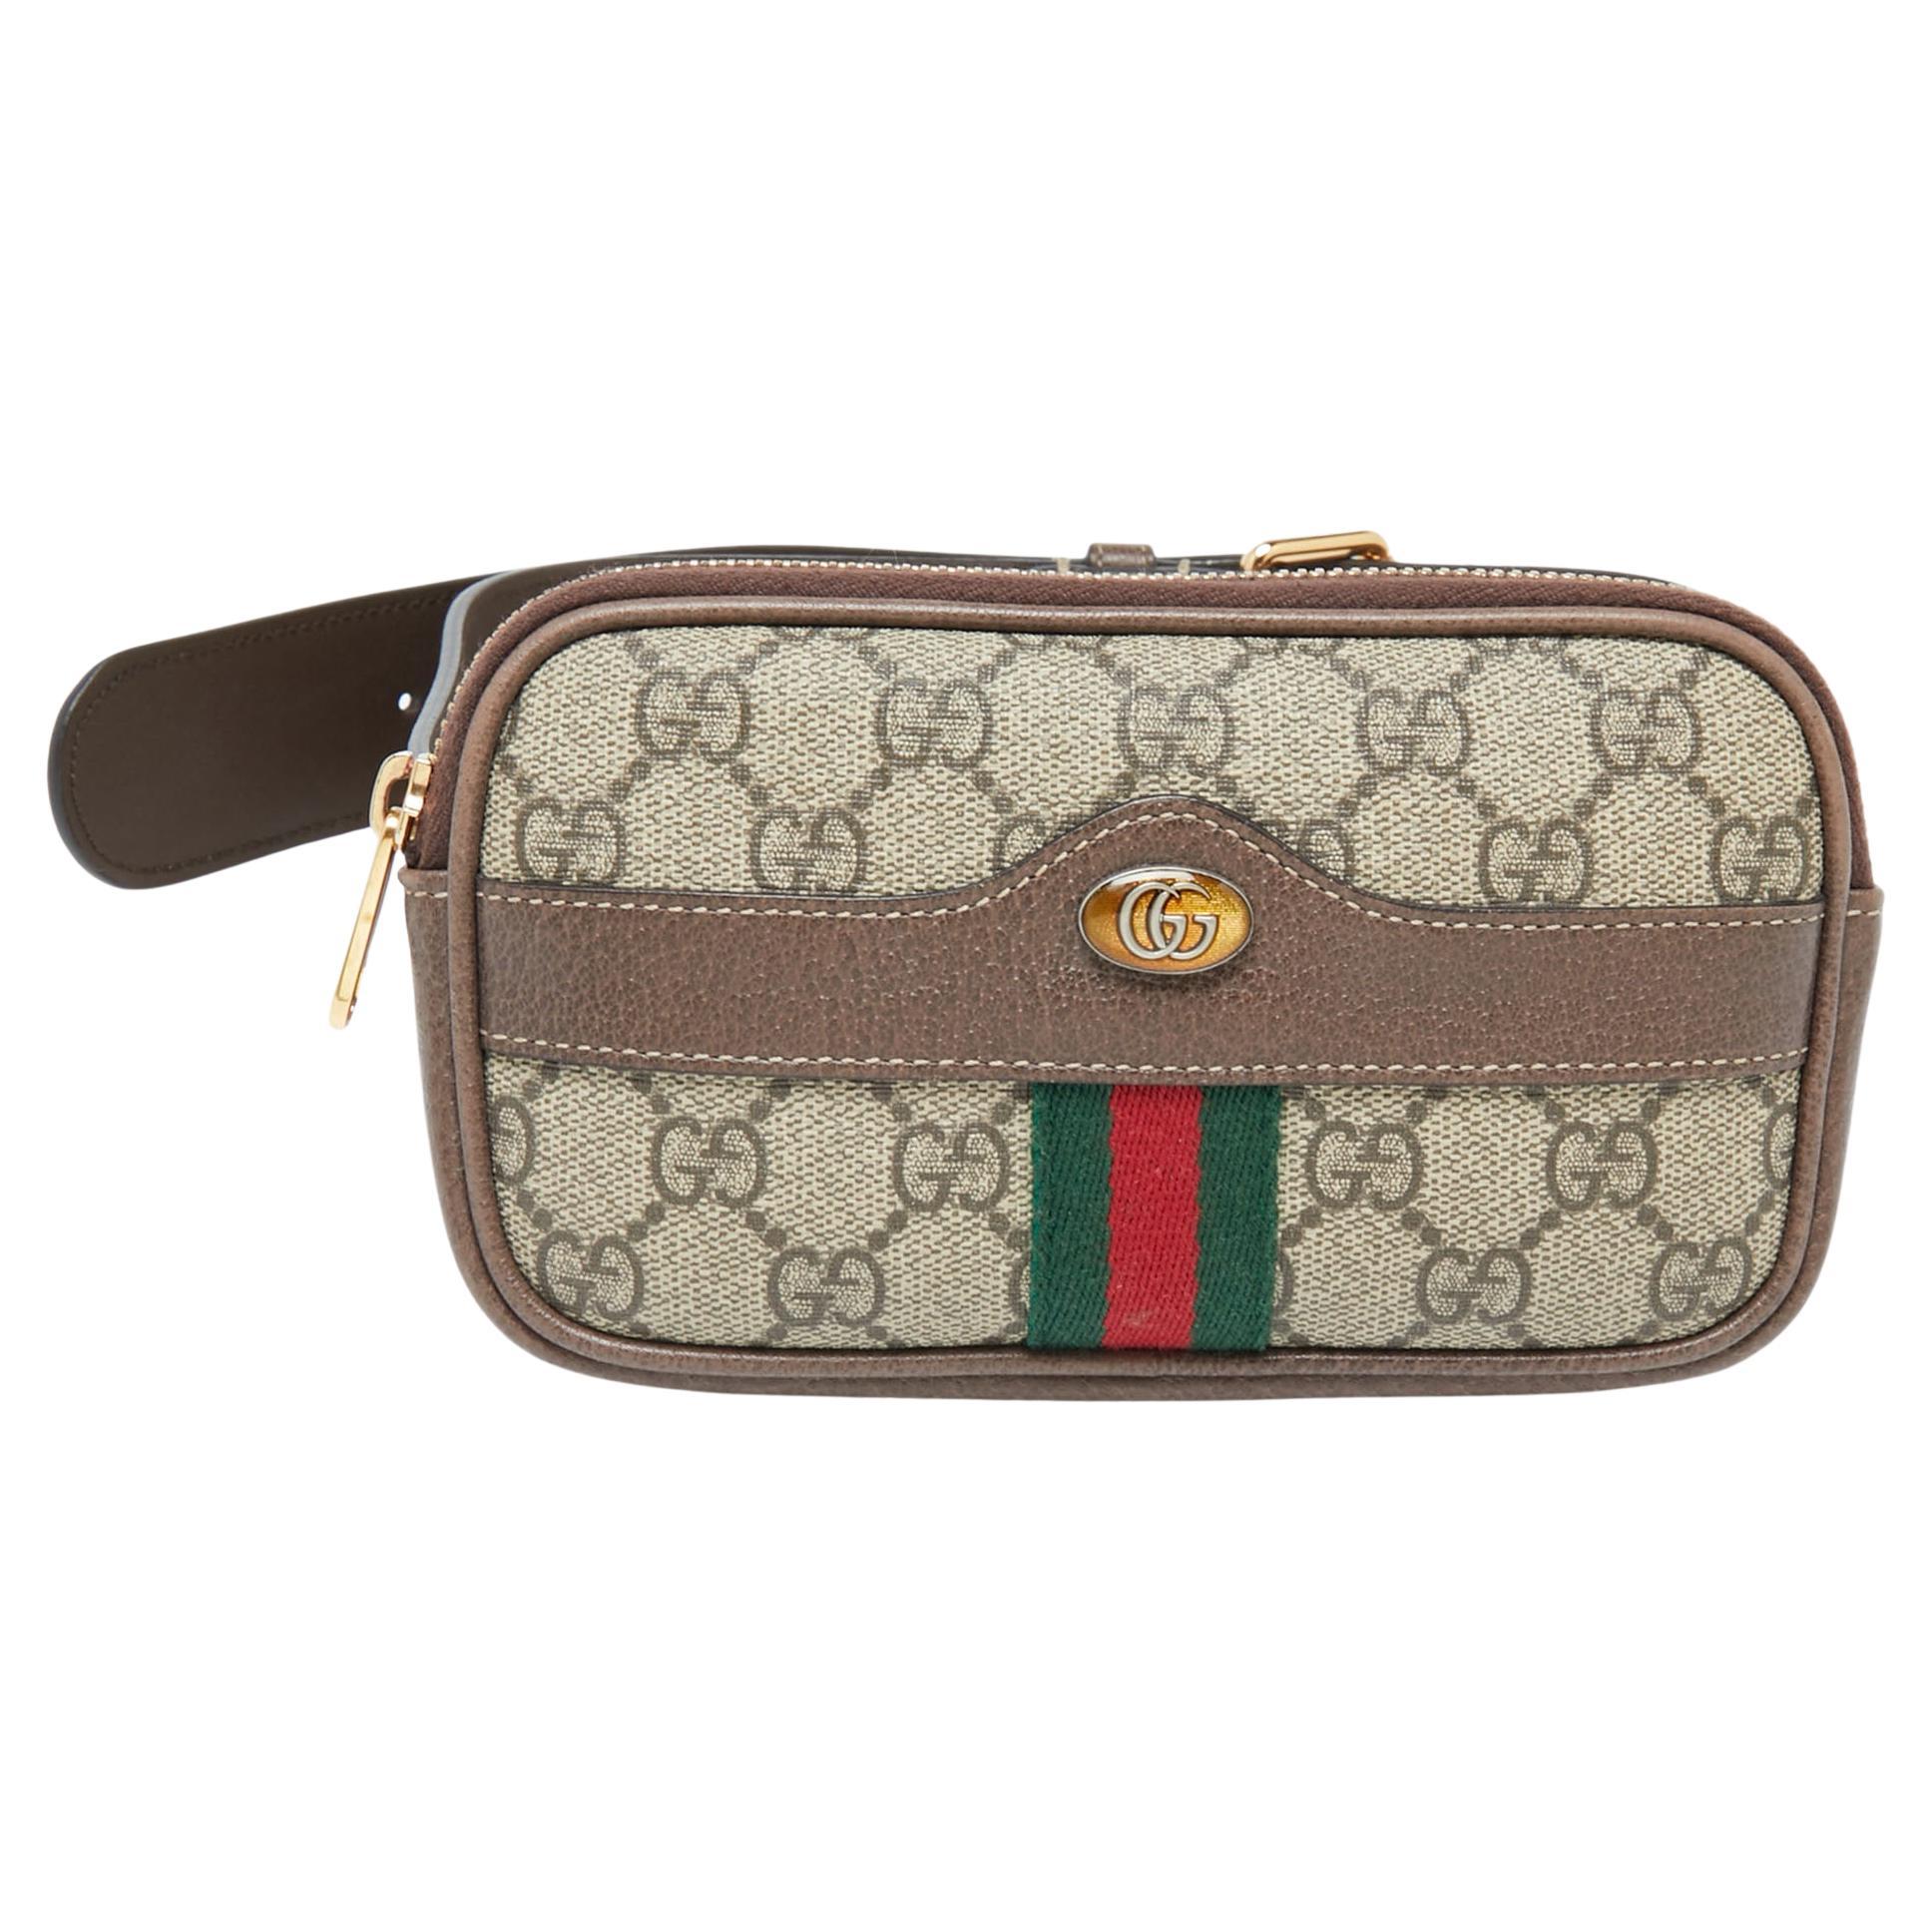 Gucci Beige/Ebony GG Supreme Coated Canvas and Leather Ophidia Belt Bag